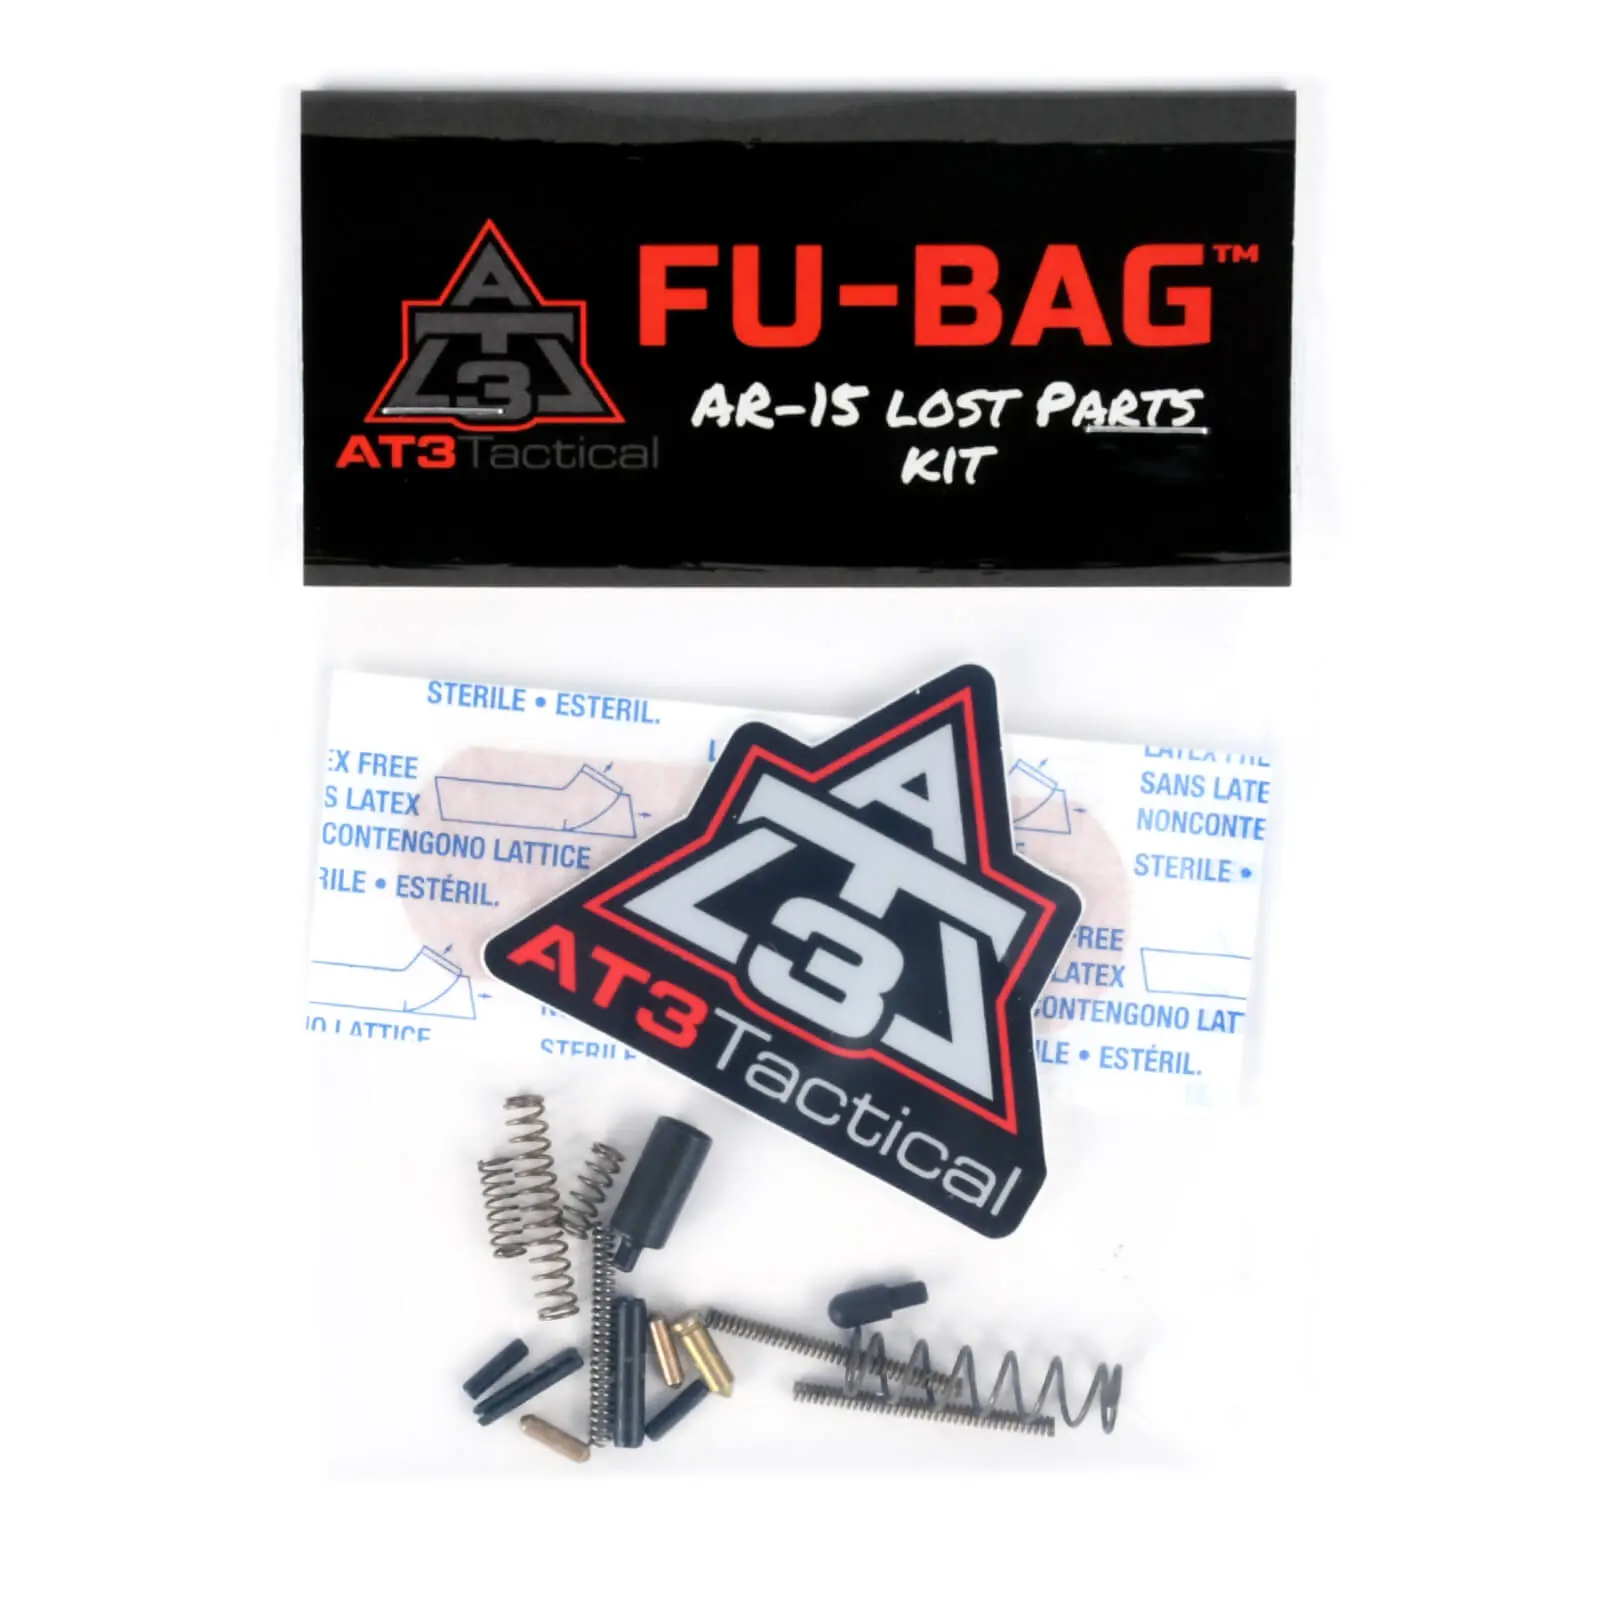 AT3™ FU-BAG™ AR-15 Lost Parts Kit – Springs, Detents, Replacement Components